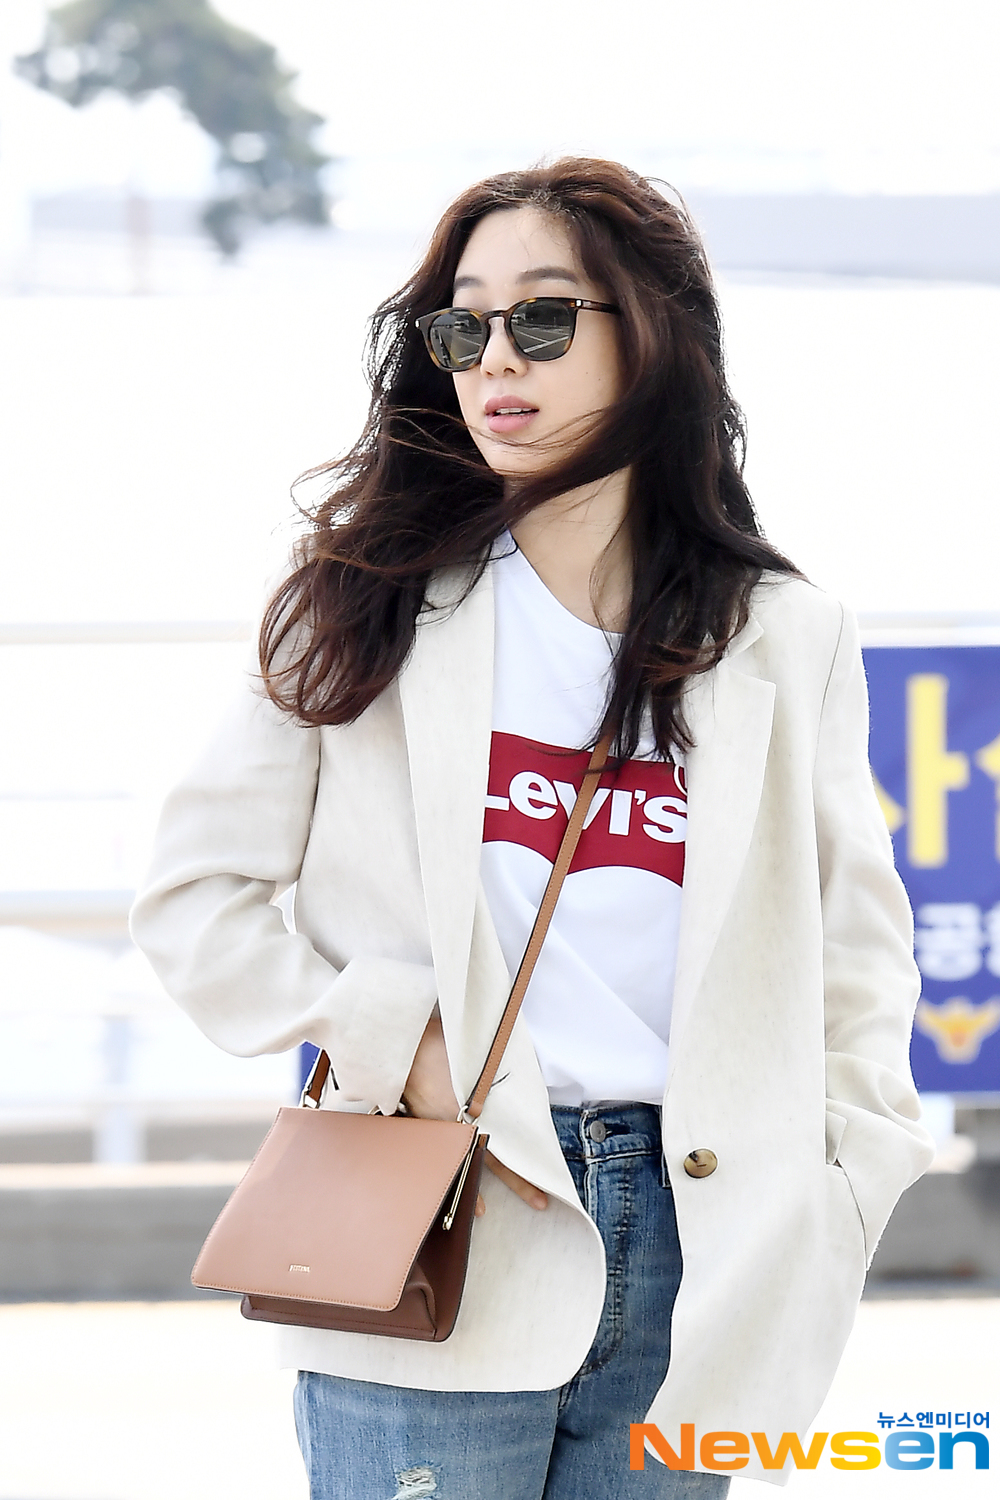 Actor Jung Ryeo-won left for Los Angeles on April 11th at Incheon International Airport in Unseo-dong, Jung-gu, Incheon.Actor Jung Ryeo-won is leaving for Los Angeles in United States of America with an airport fashion.exponential earthquake